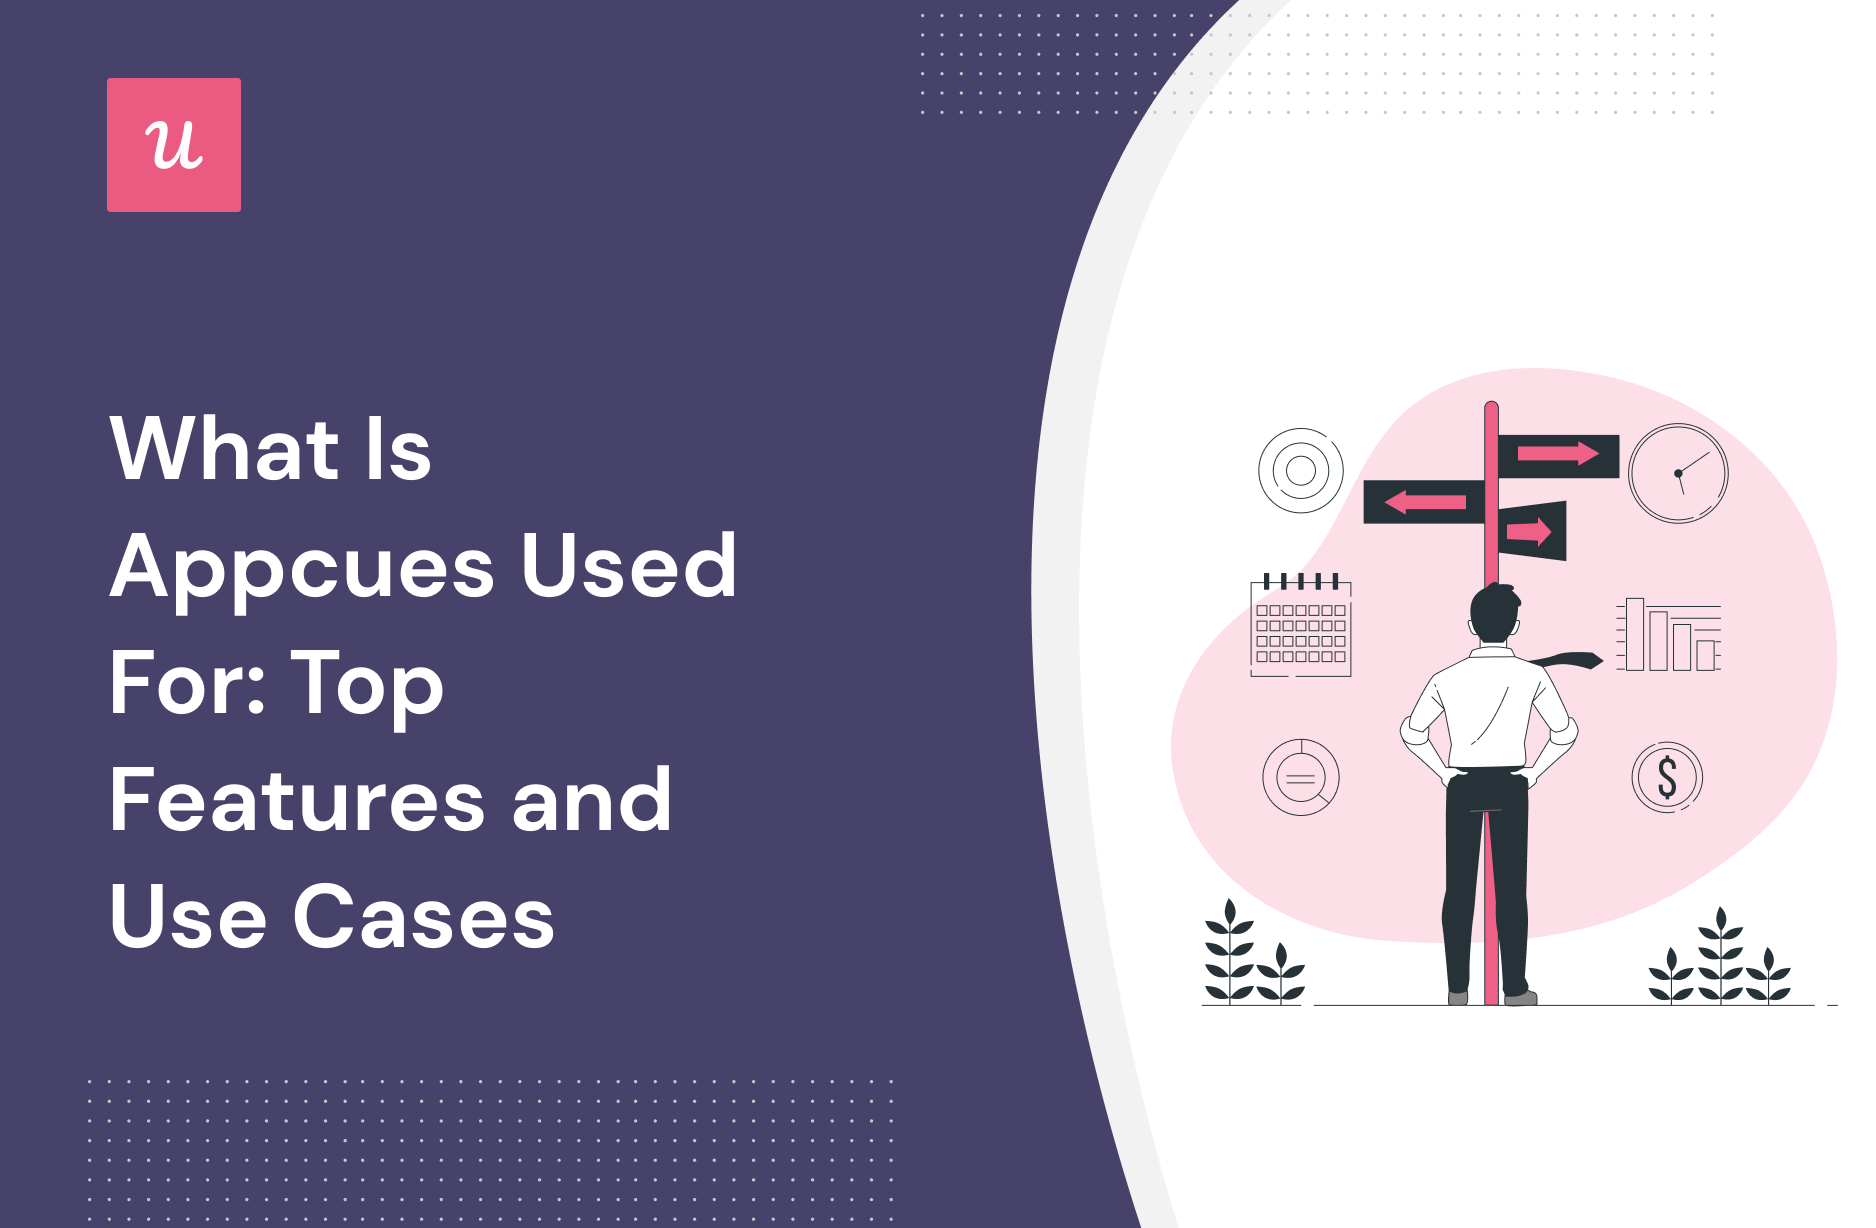 What Is Appcues Used For: Top Features and Use Cases